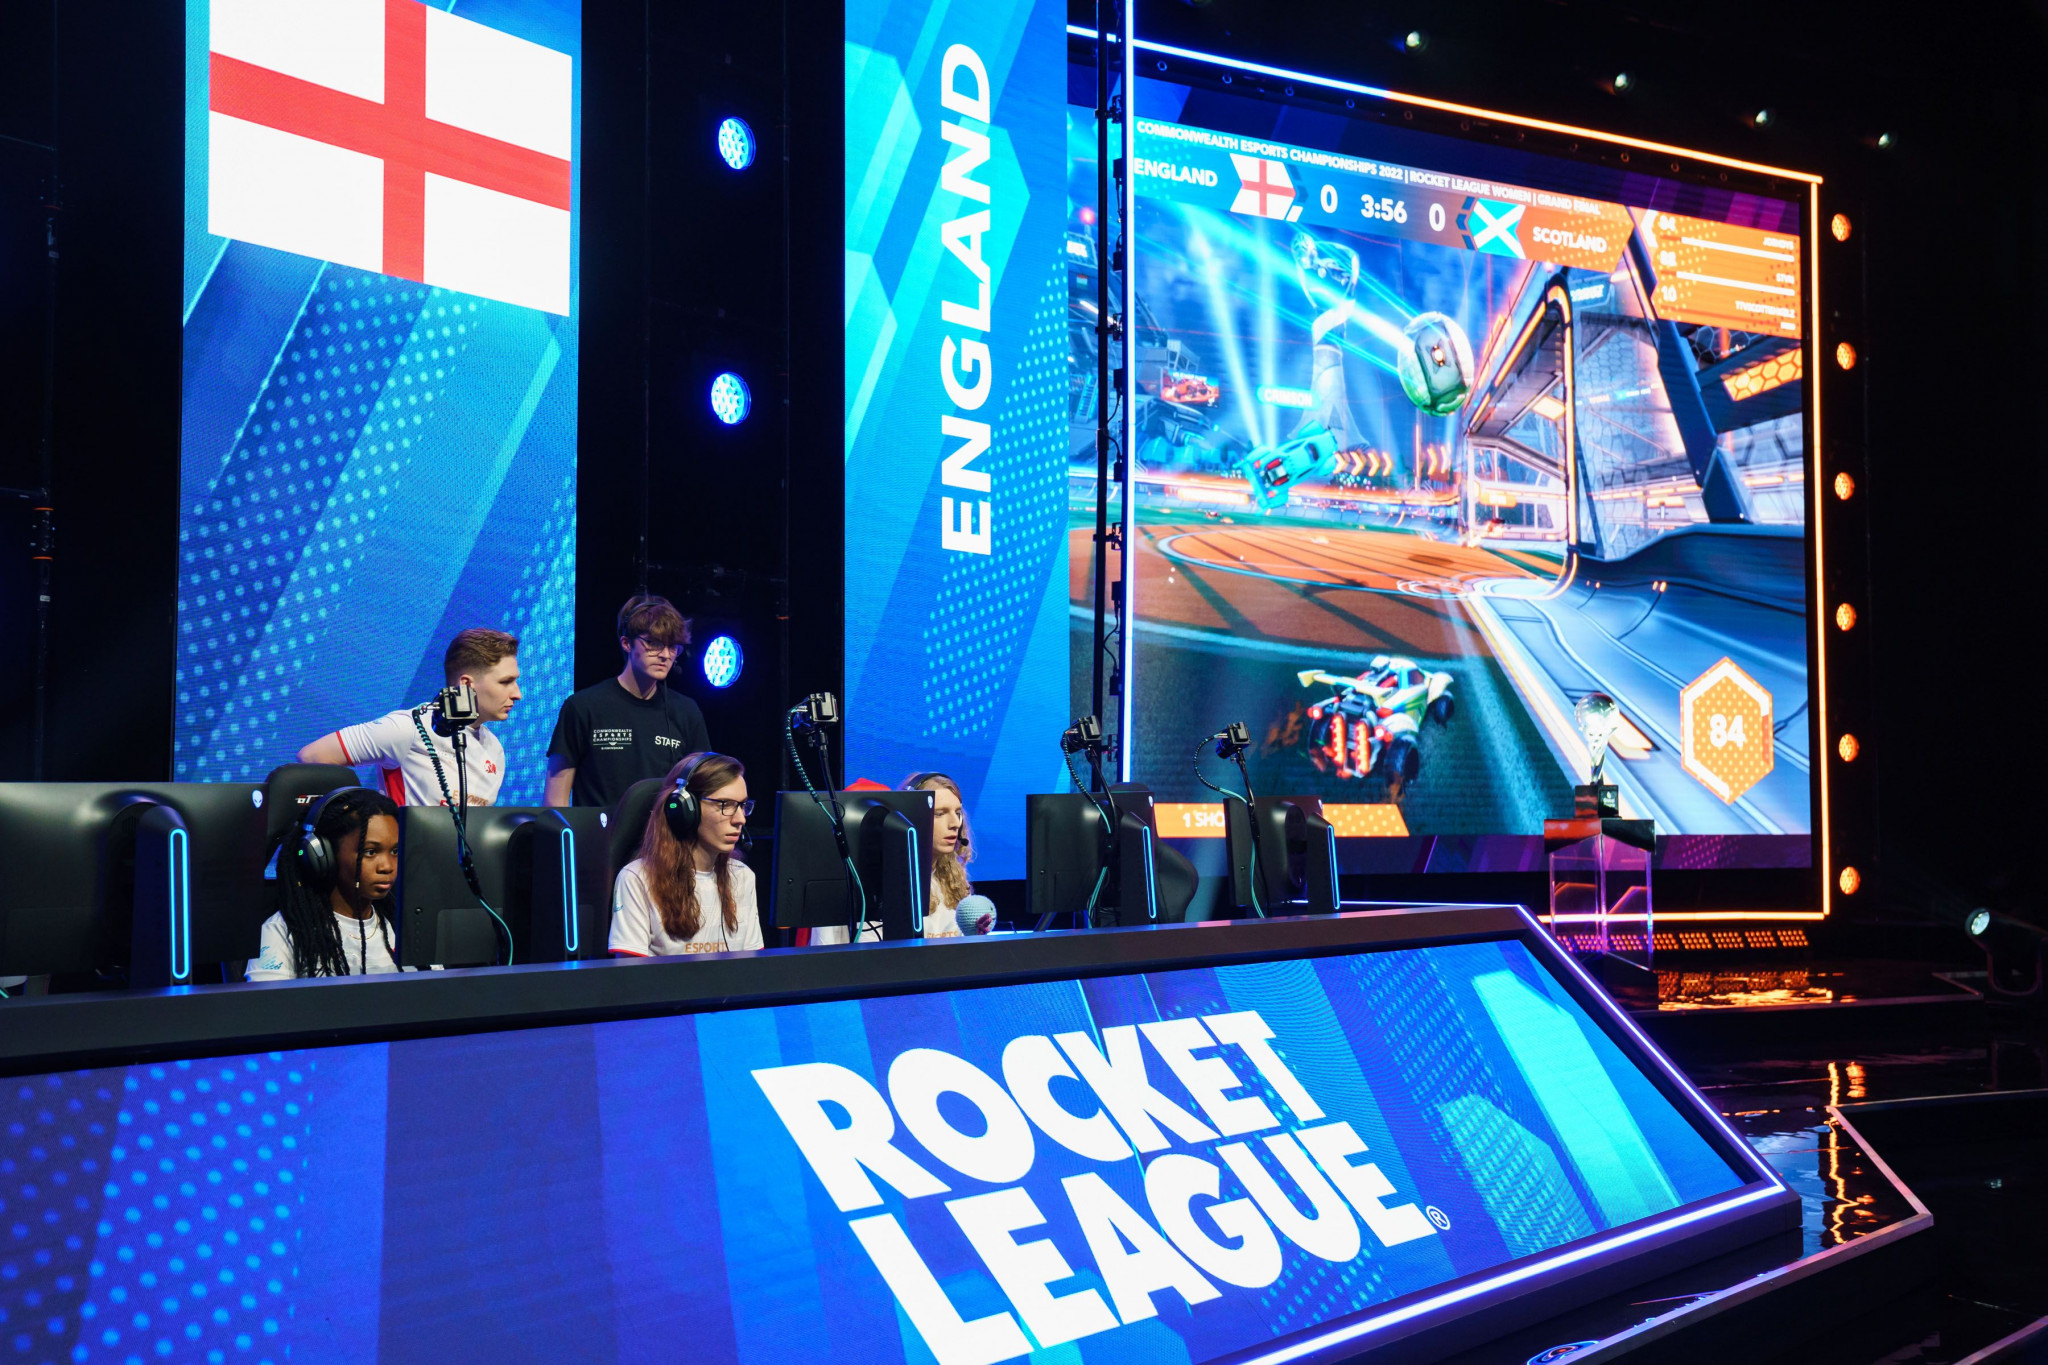 England achieved their only gold medal of the competition in Rocket League women ©GEF